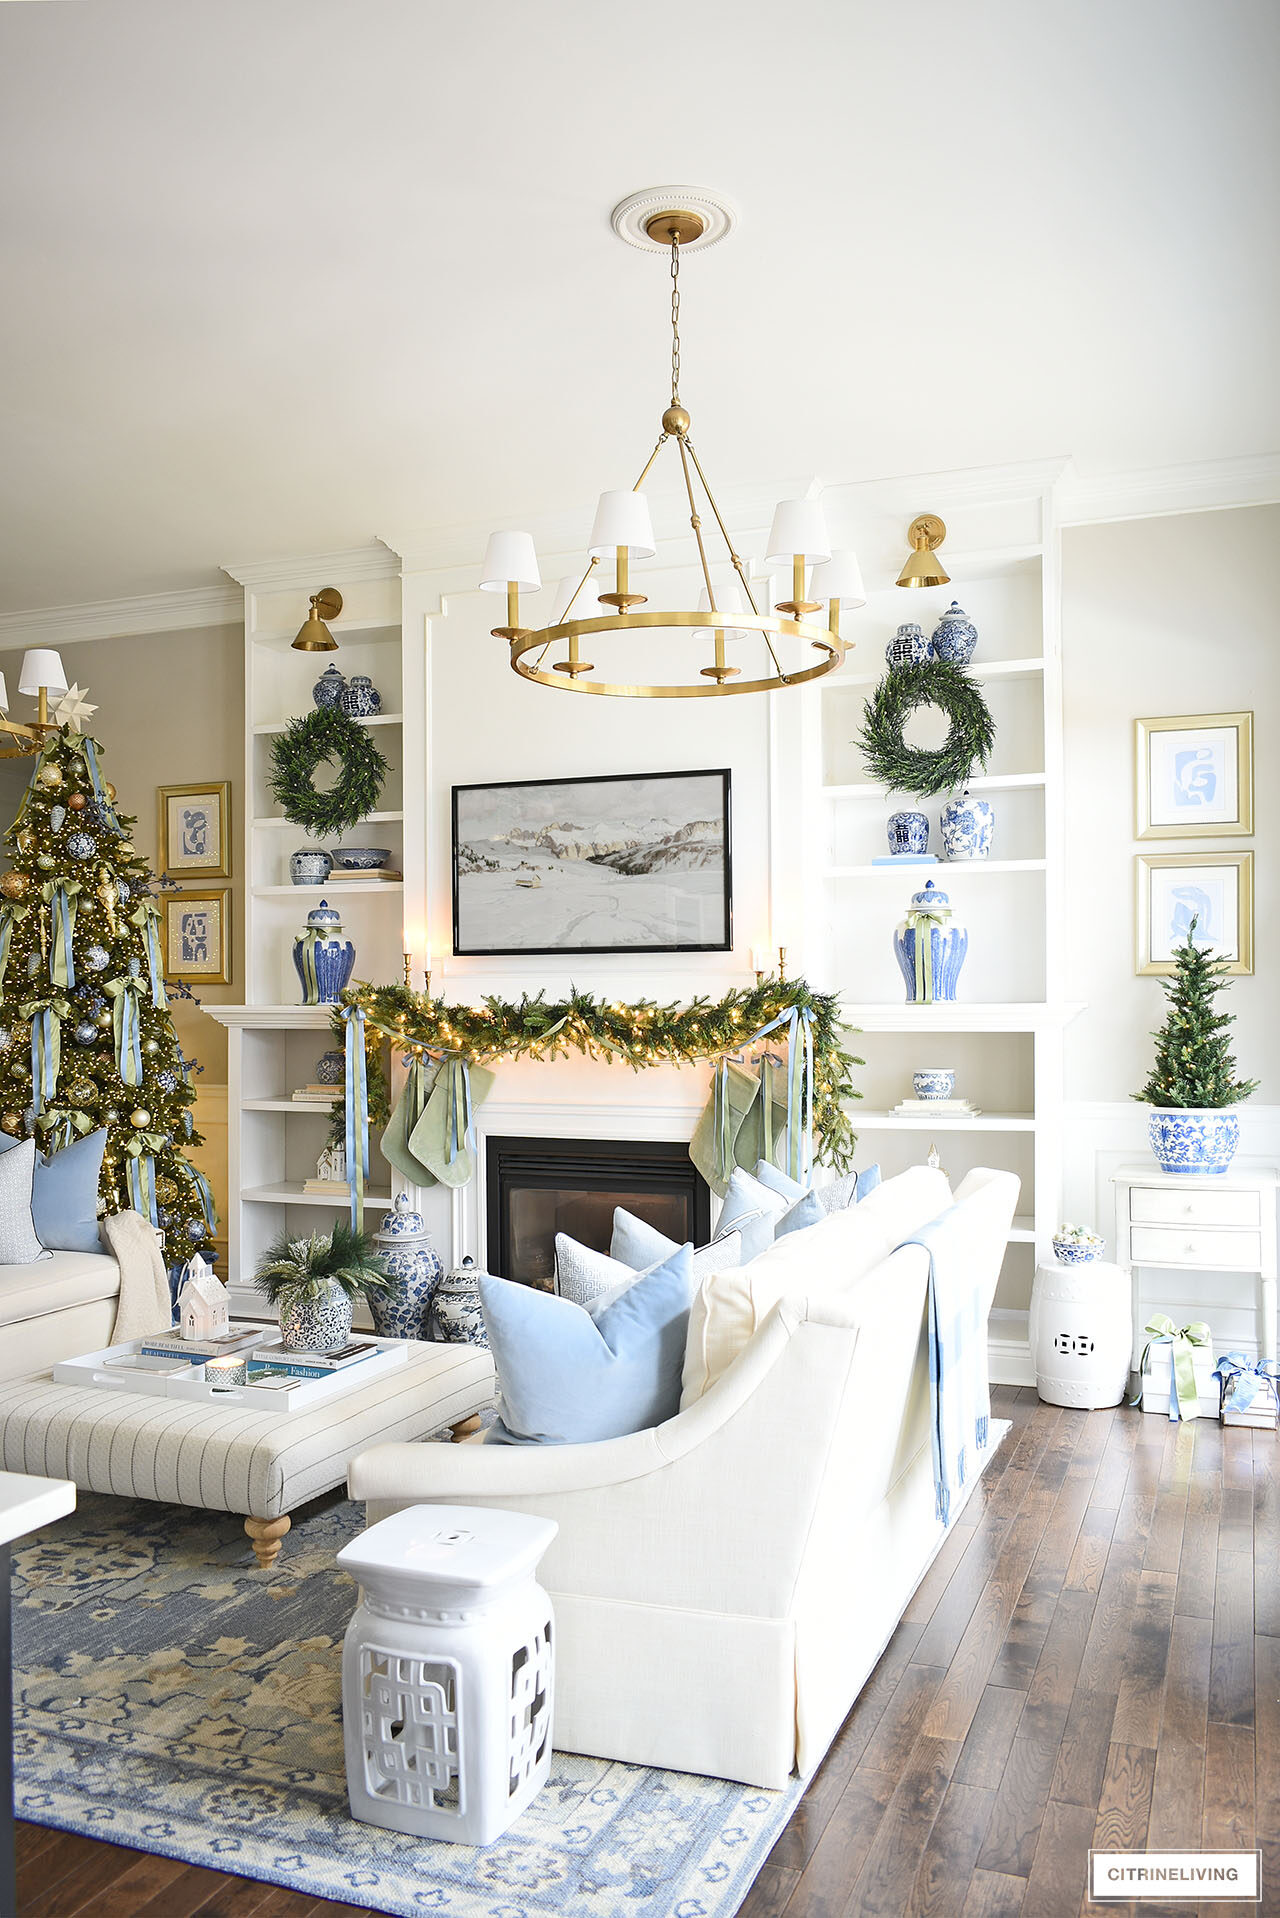 Beautiful floor to ceiling shelves and fireplace decorated for Christmas with green garland and wreaths.